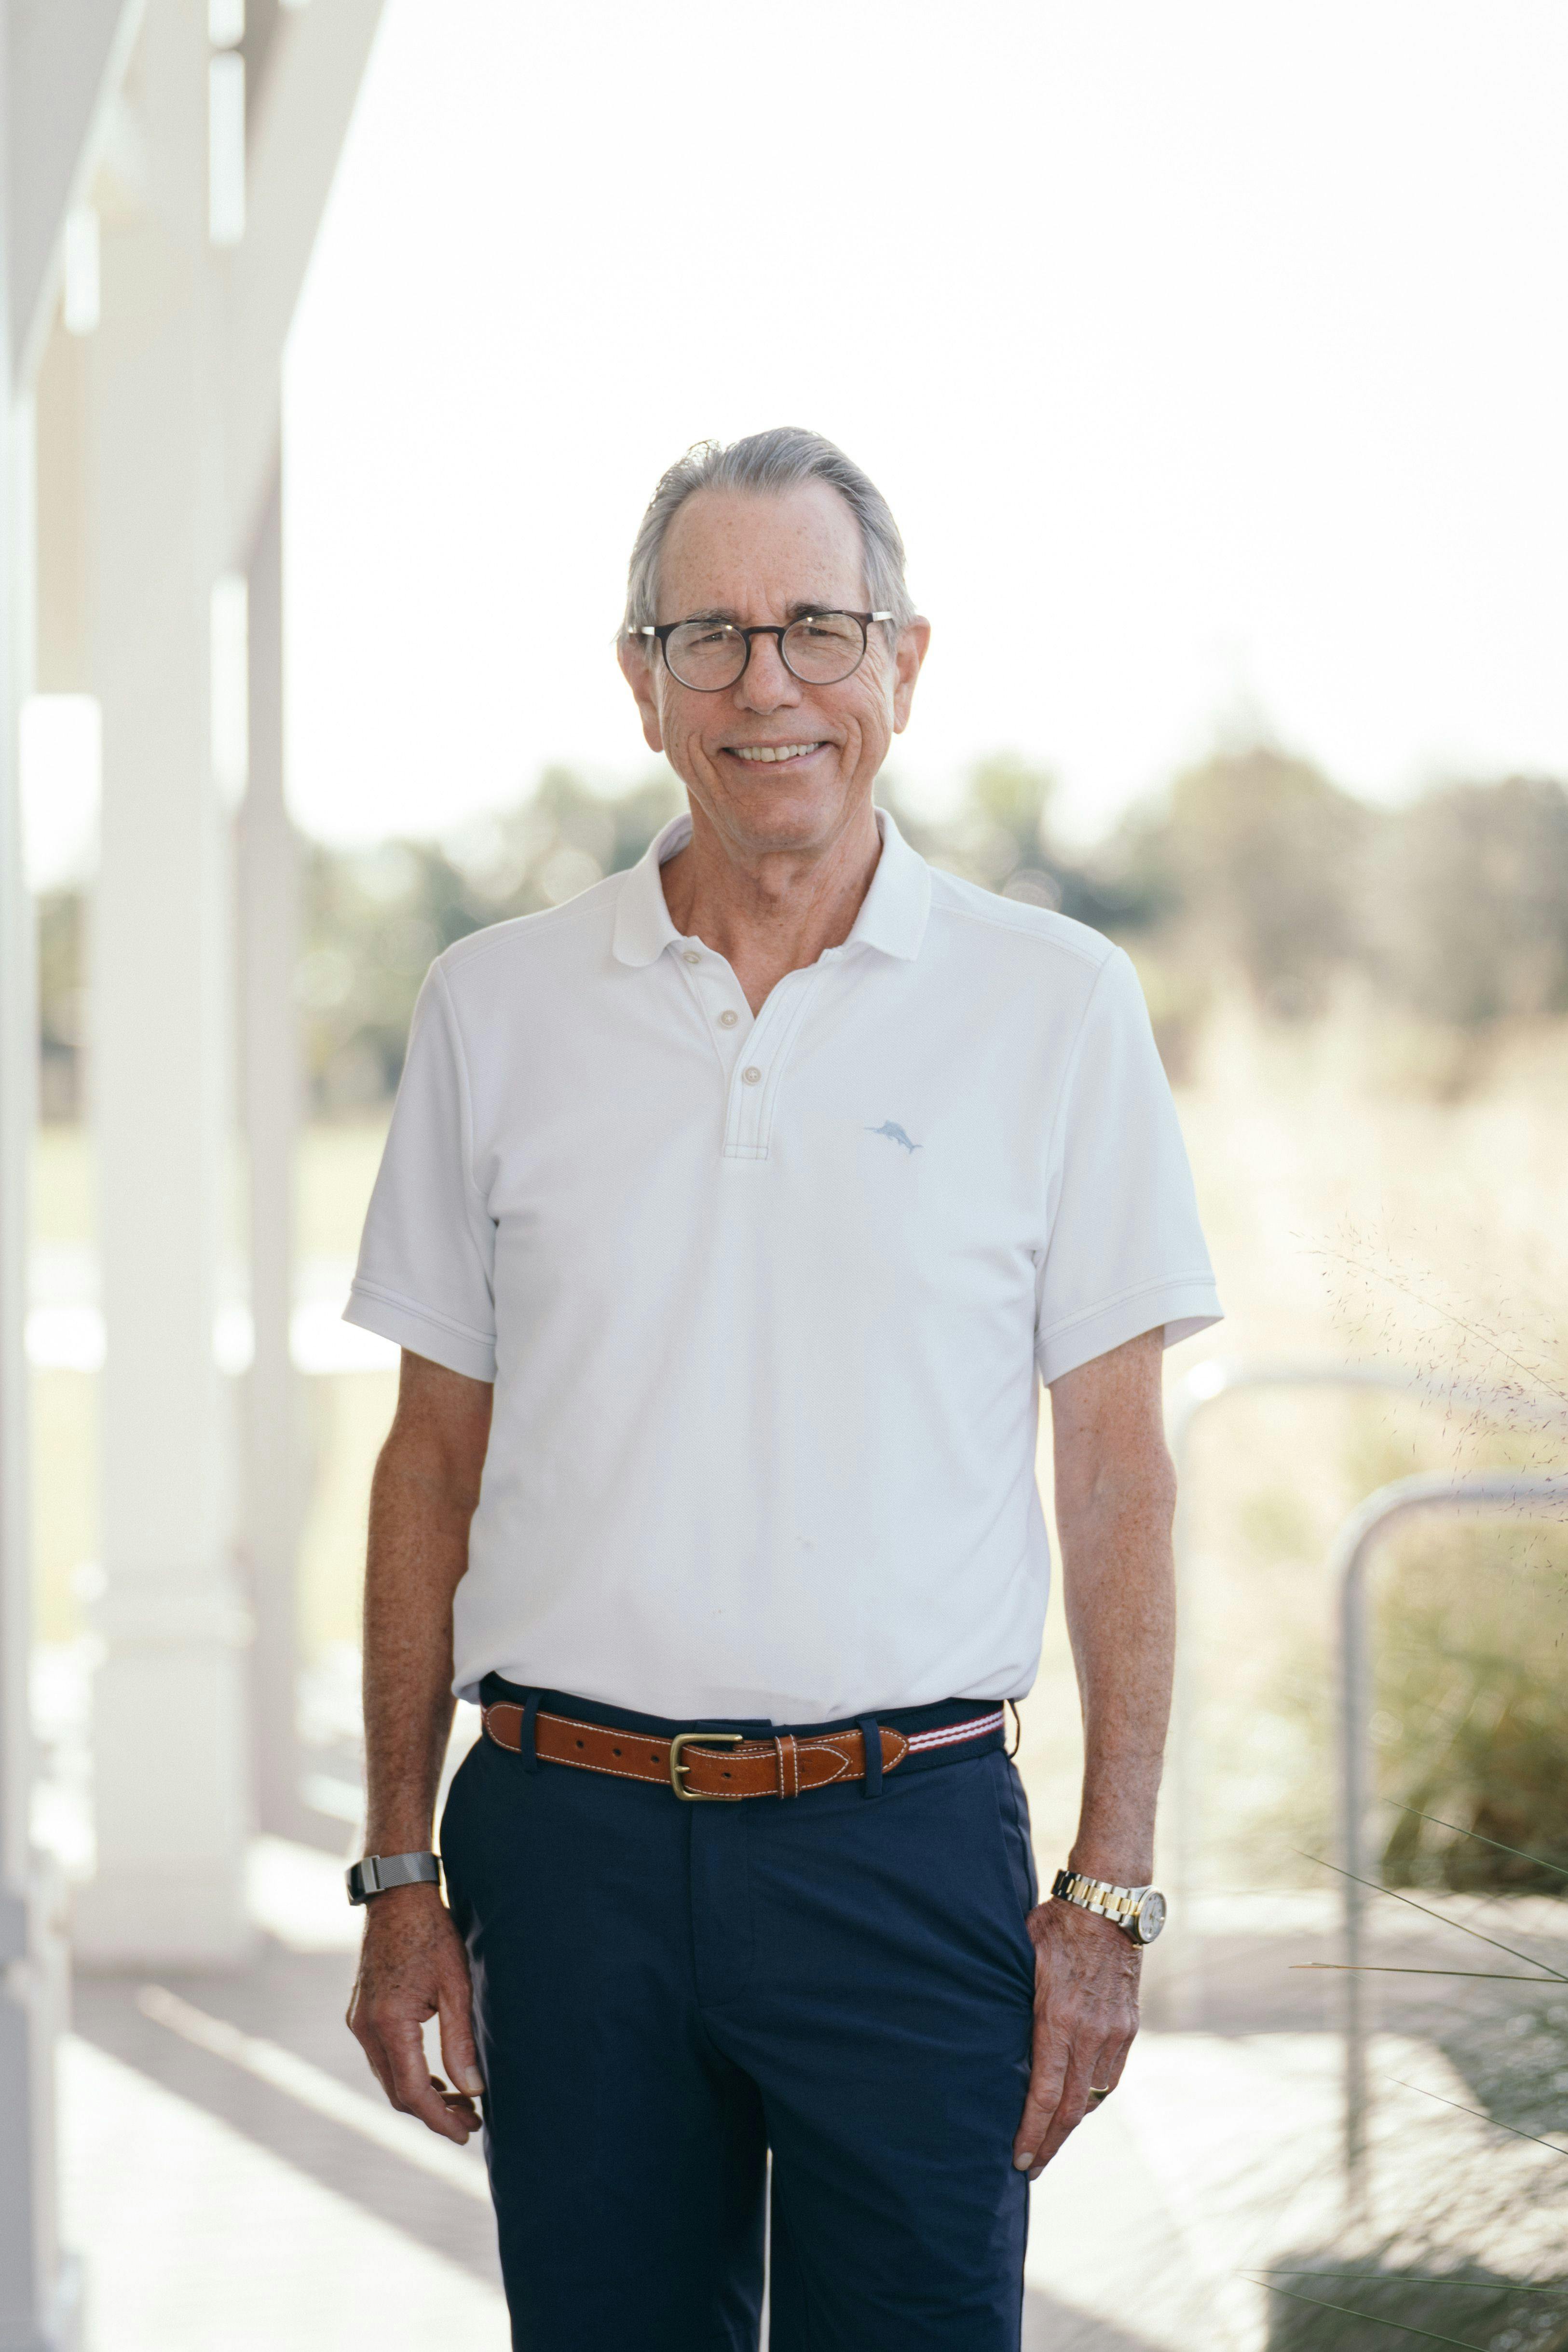 David Boule recalls that not many people were concerned about the rare disease prior to the World Health Organization’s decision to reclassify myeloproliferative disorders to myeloproliferative neoplasms.

Photo by Monica Alvarez